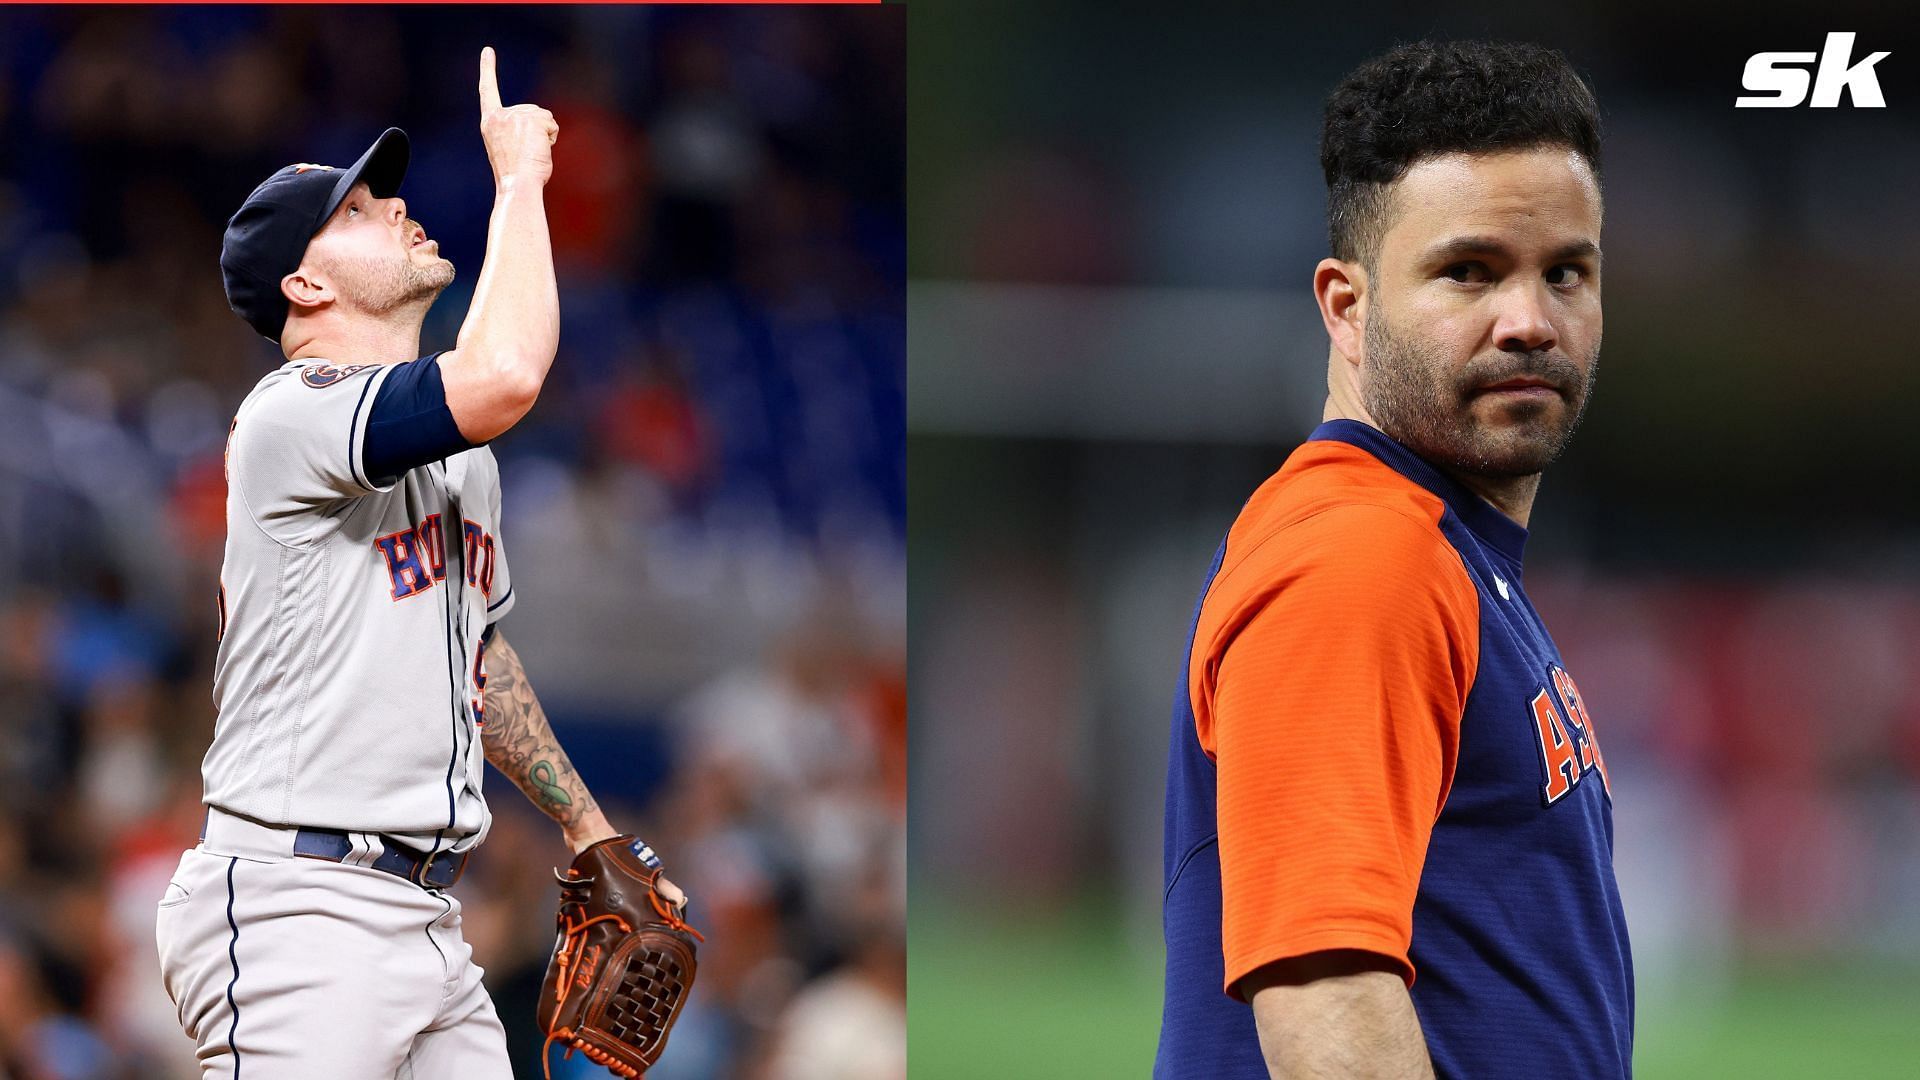 On Saturday, 6 P.M. CST, Kyle Tucker and Ryan Pressley are pit against  Astros legend Jose Altuve. Take your pick, Houston! : r/Astros